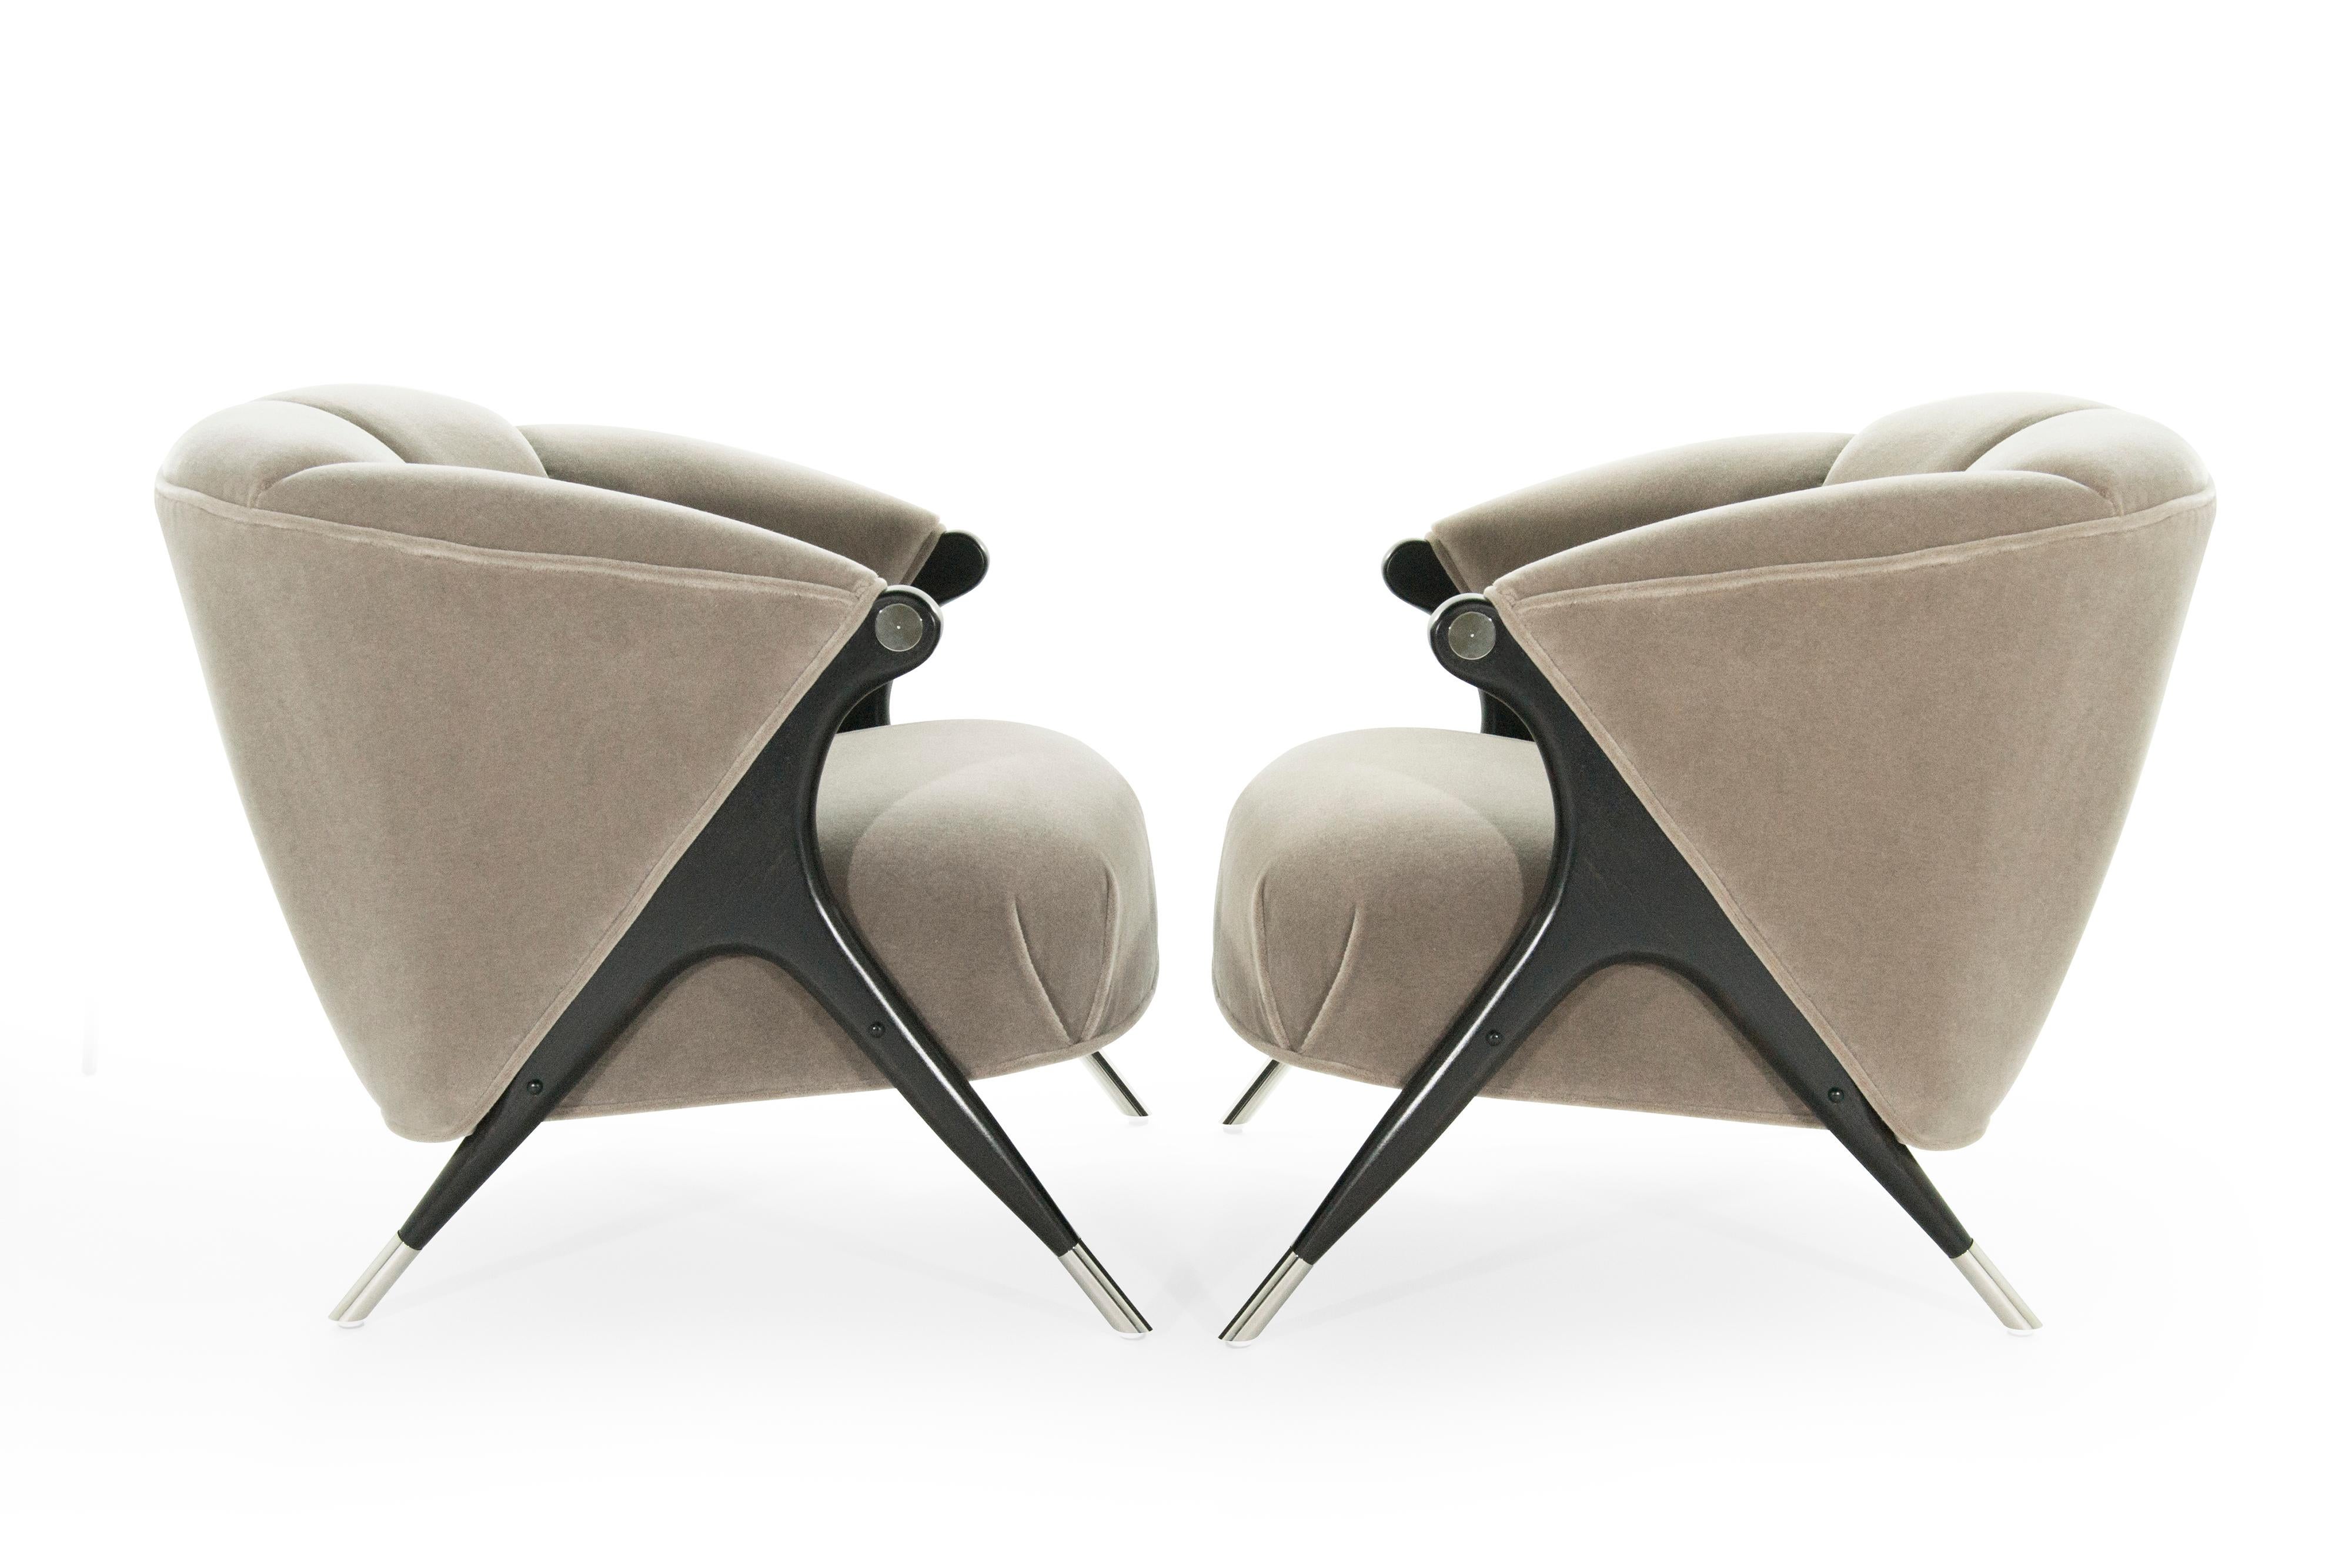 Stunning and rare pair of lounge chair by Karpen of California, circa 1950s.

Newly upholstered in taupe mohair, sculptural maple legs newly restored to their original ebonized finish, newly nickel plated sabots and arm hardware.

Priced as pair.